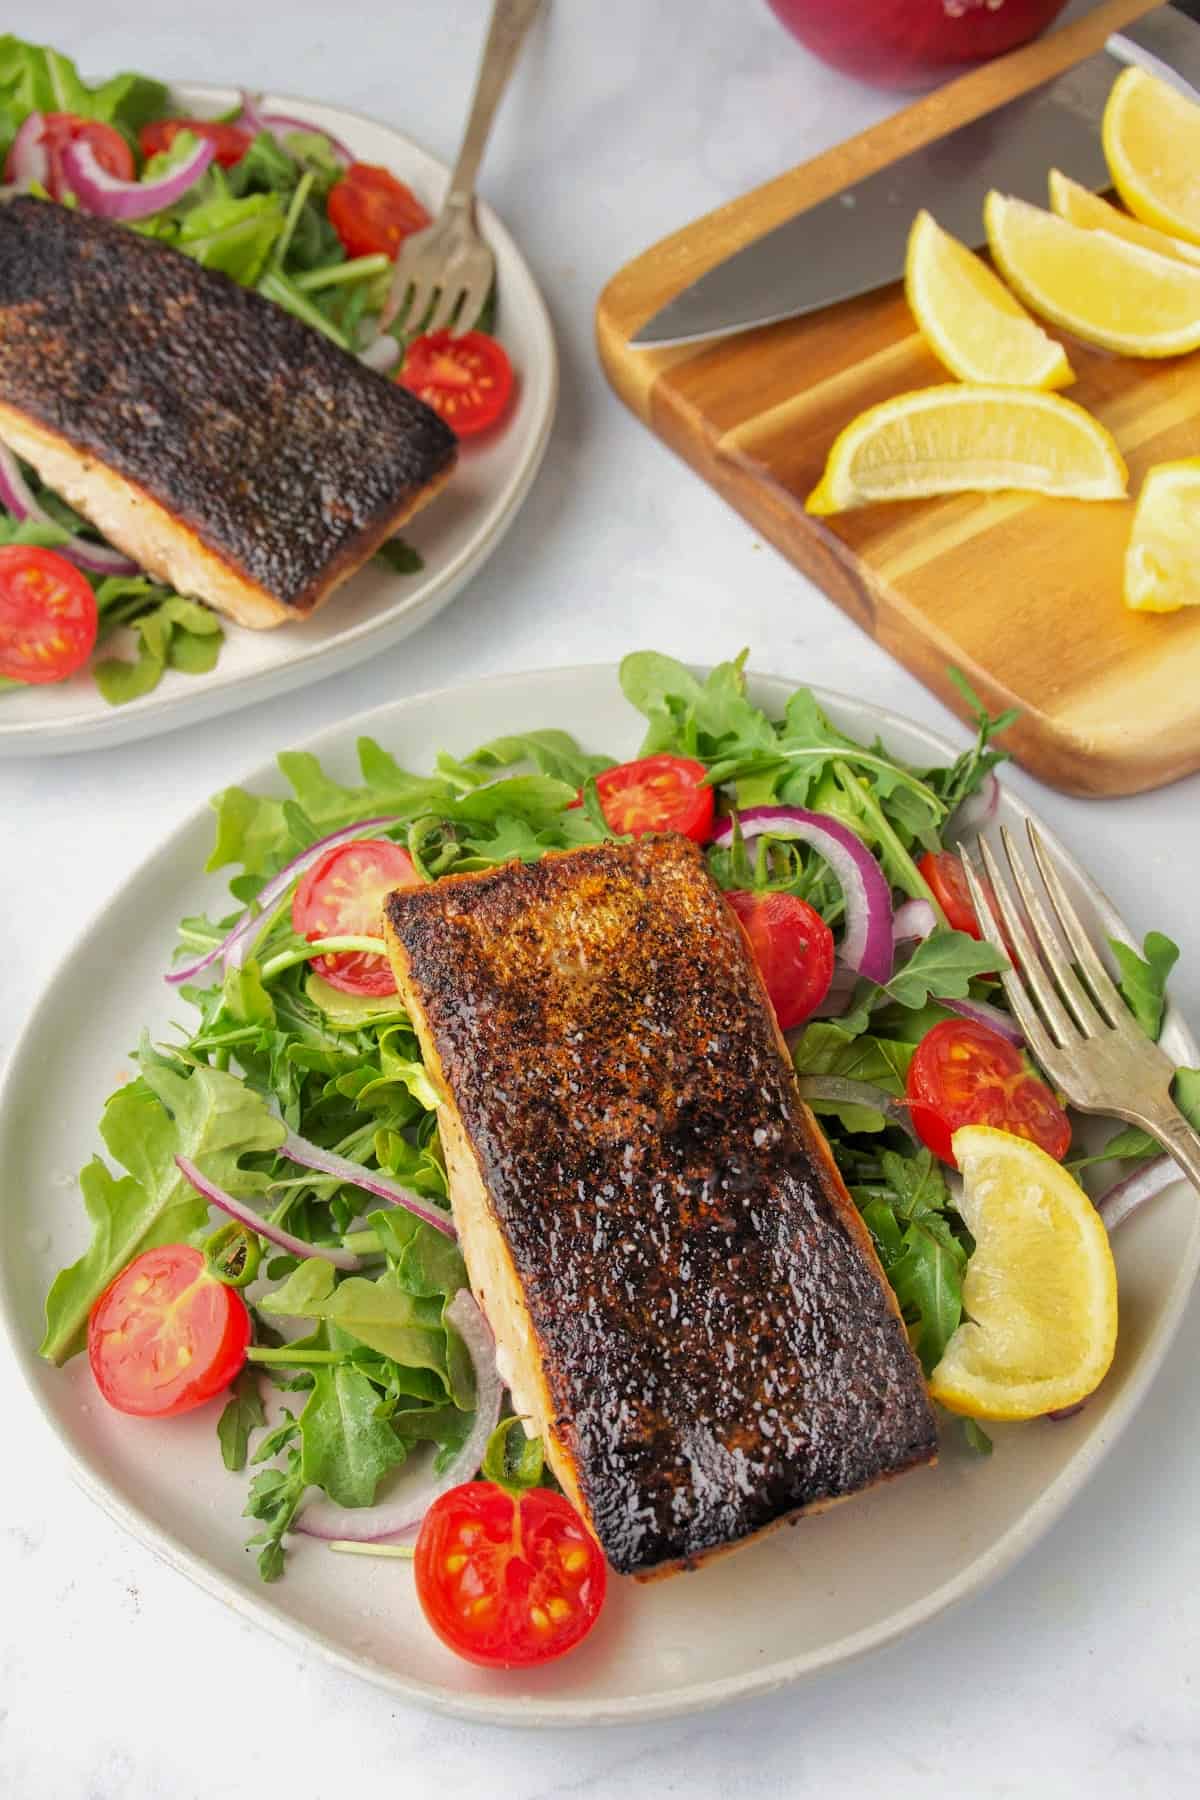 two simple green salads that include spring mix, cherry tomatoes, and red onions topped with cast iron crispy skin salmon